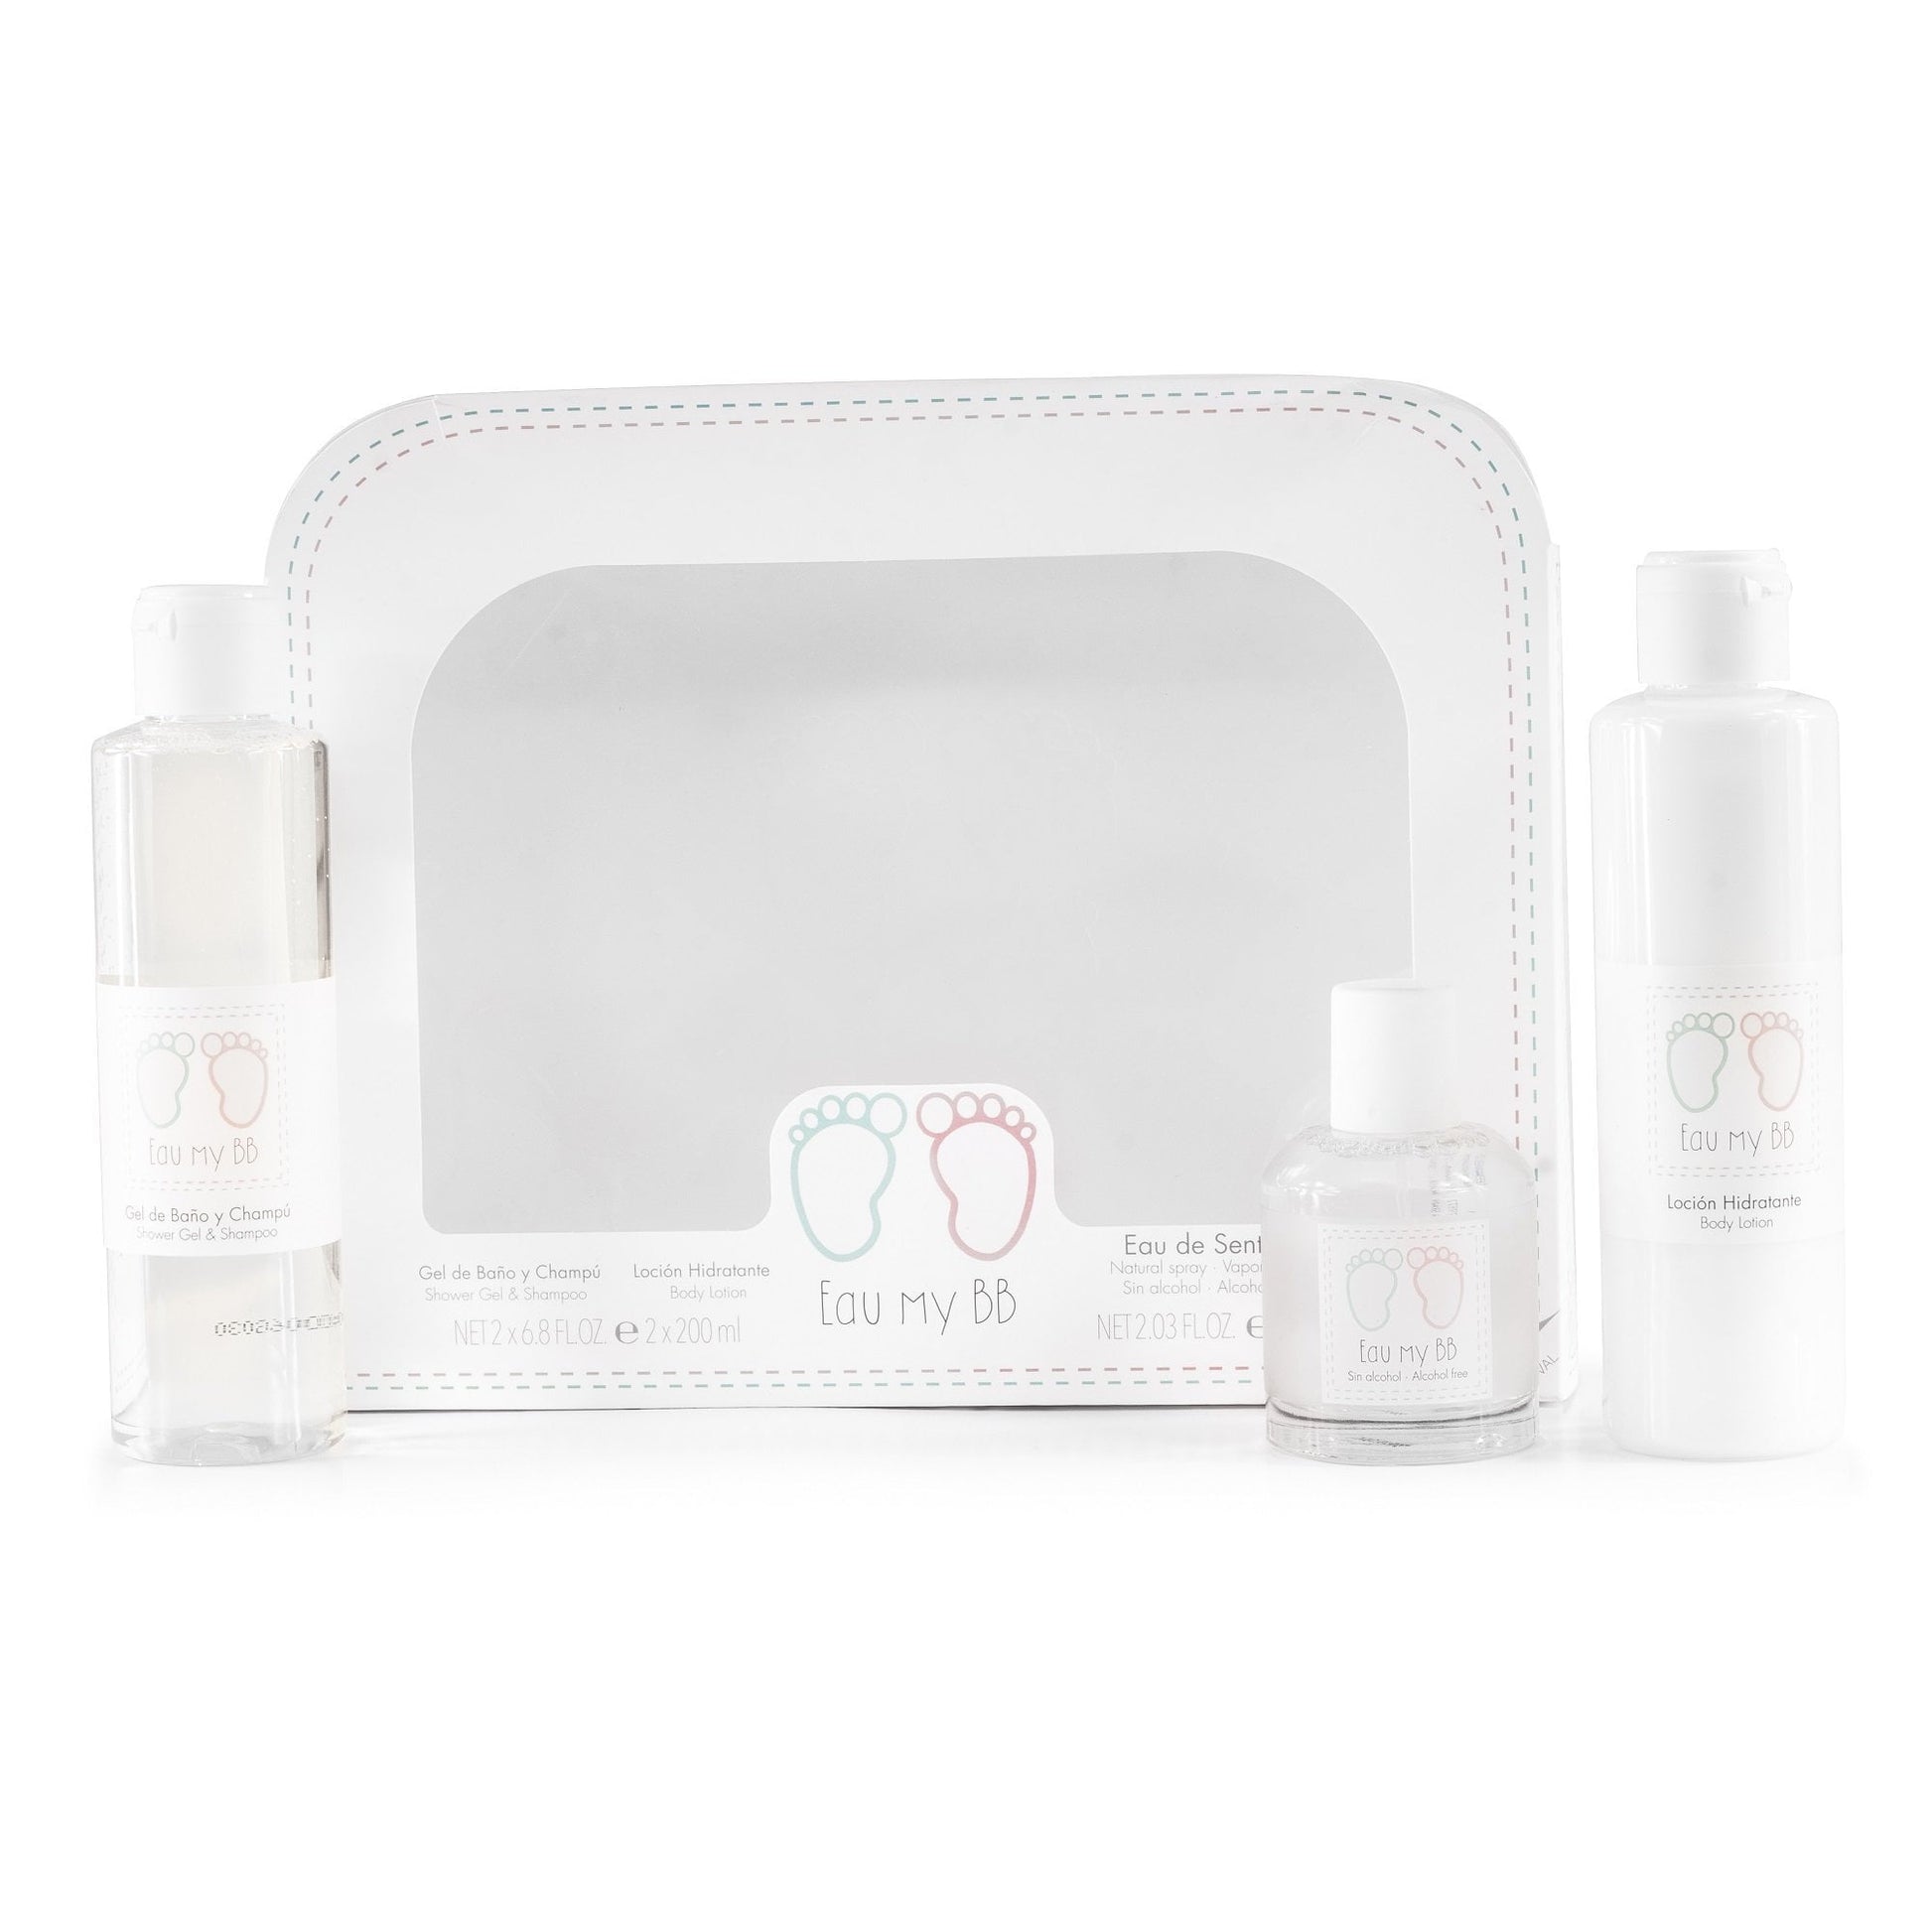 Eau my BB Gift Set for Girls, Product image 1